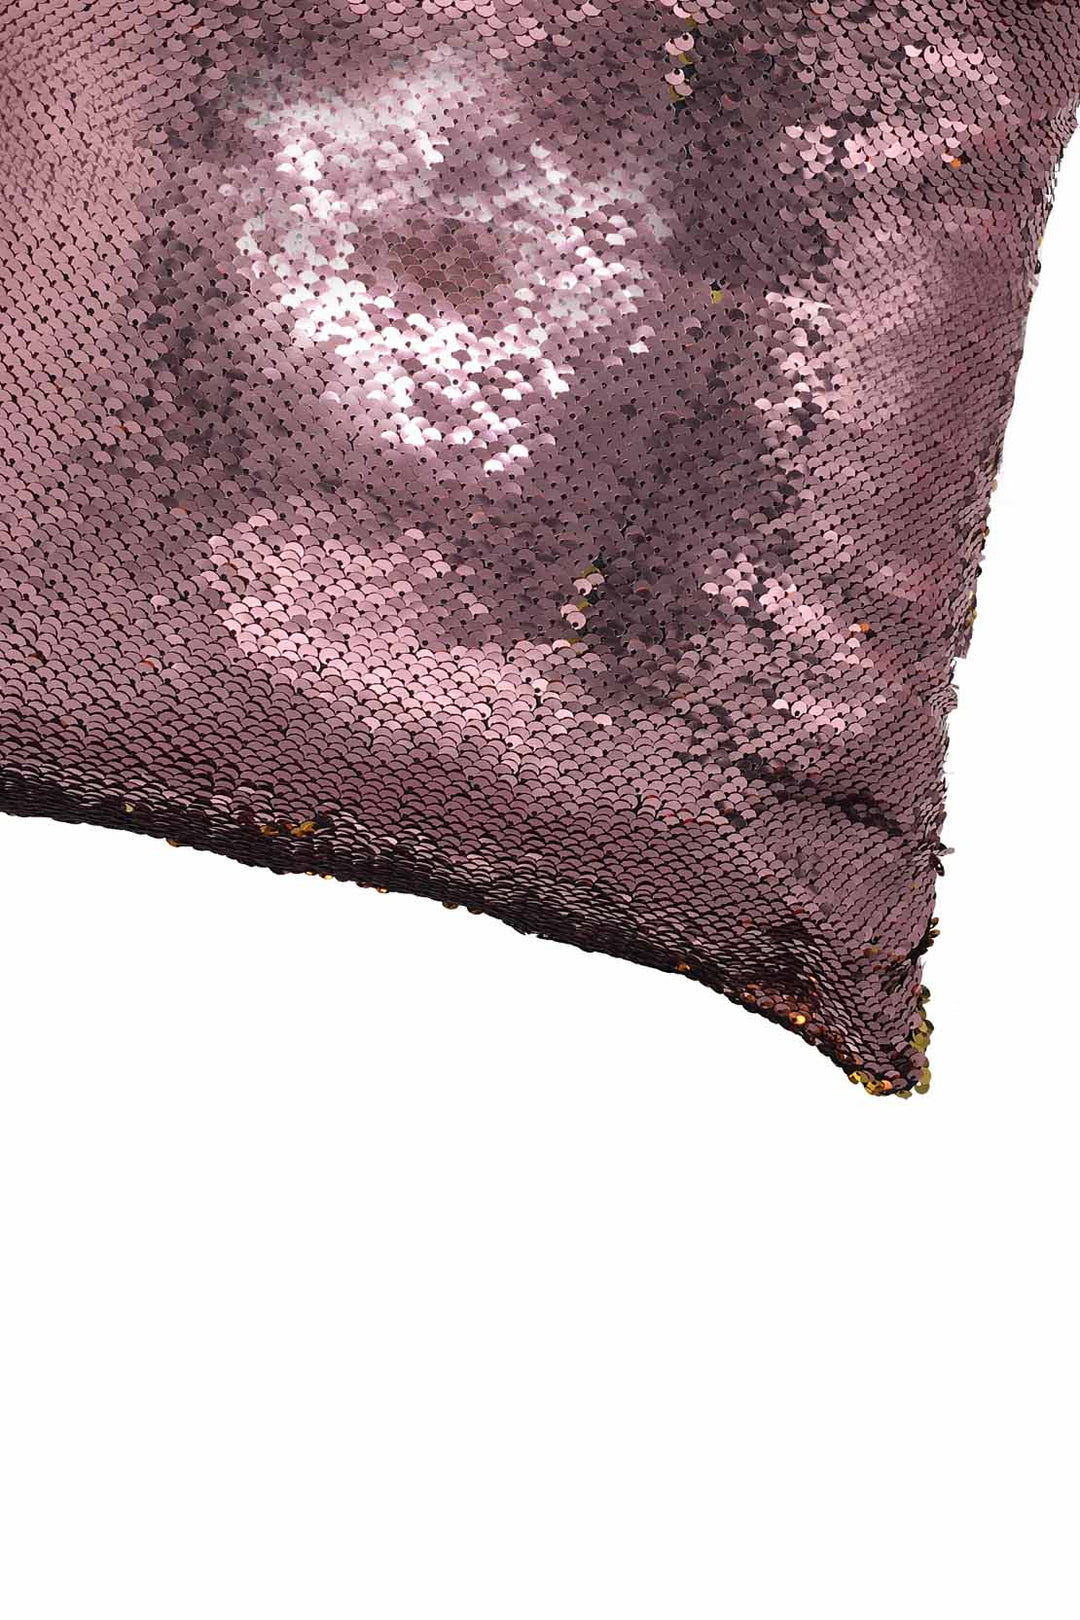 Glitter Cushion Cover Without Silver and Peach - V Surfaces